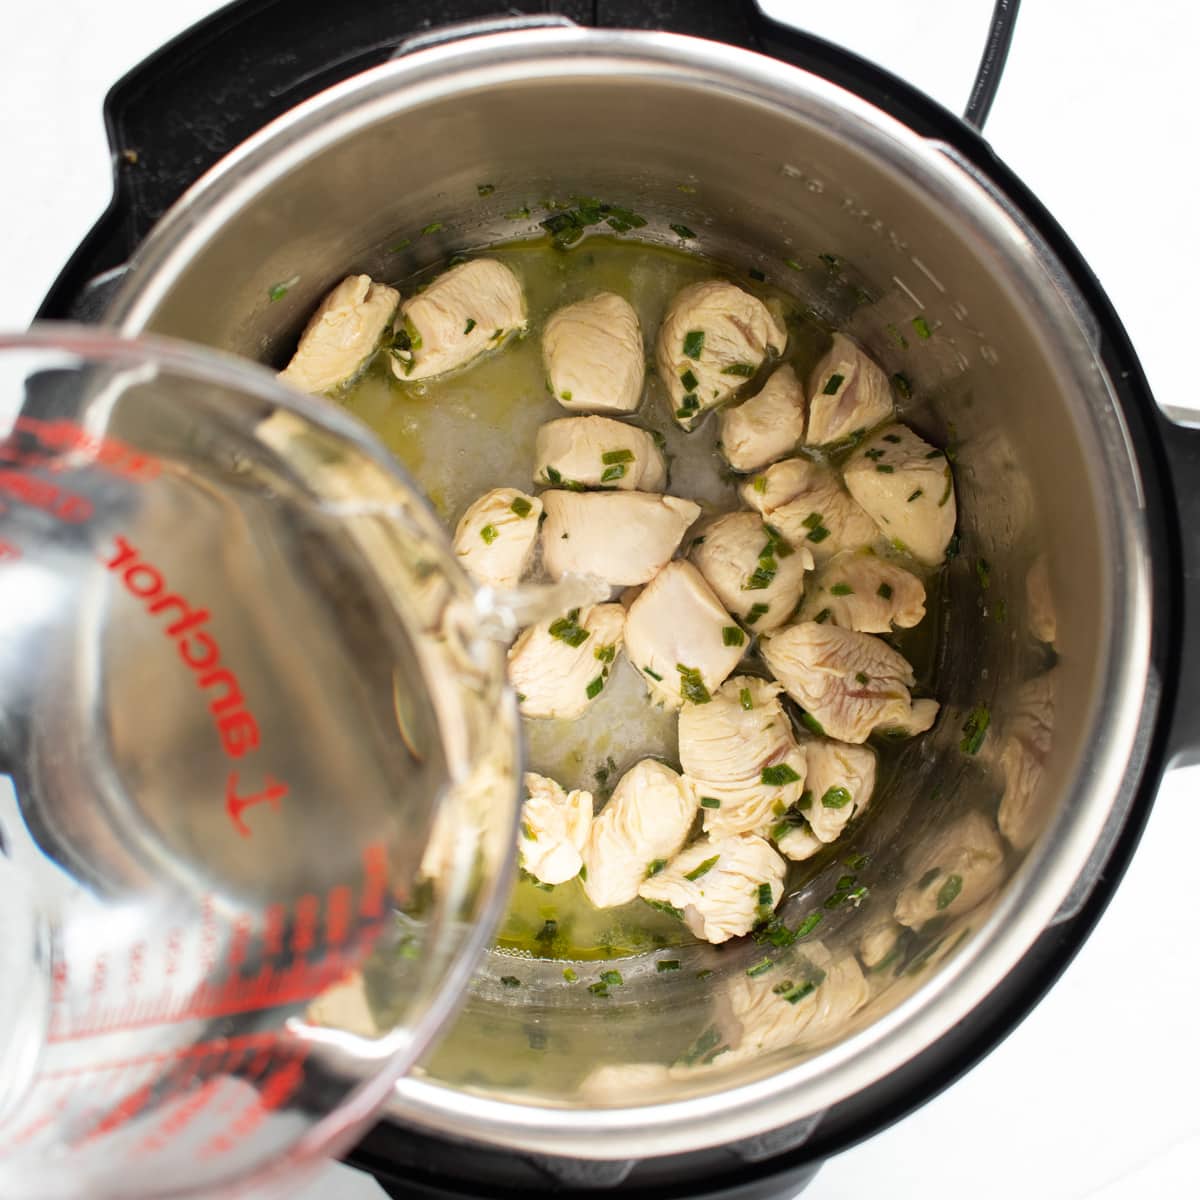 Browned chicken and leek leaves in an Instant Pot with water being poured in to help deglaze the bottom of the pan.